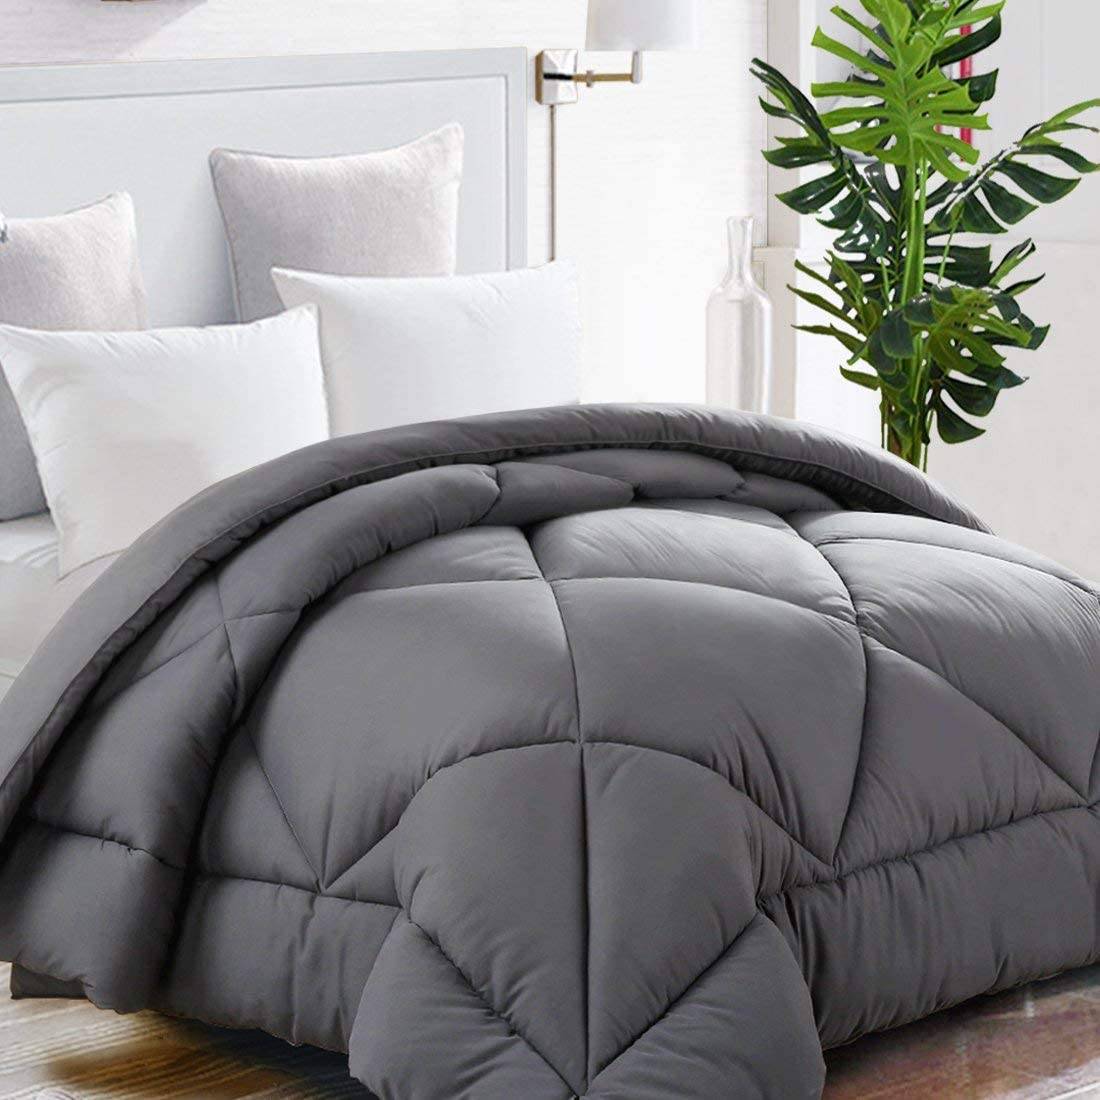 Best Down Alternative Comforters from Amazon Reviews 2020 The Sleep Judge